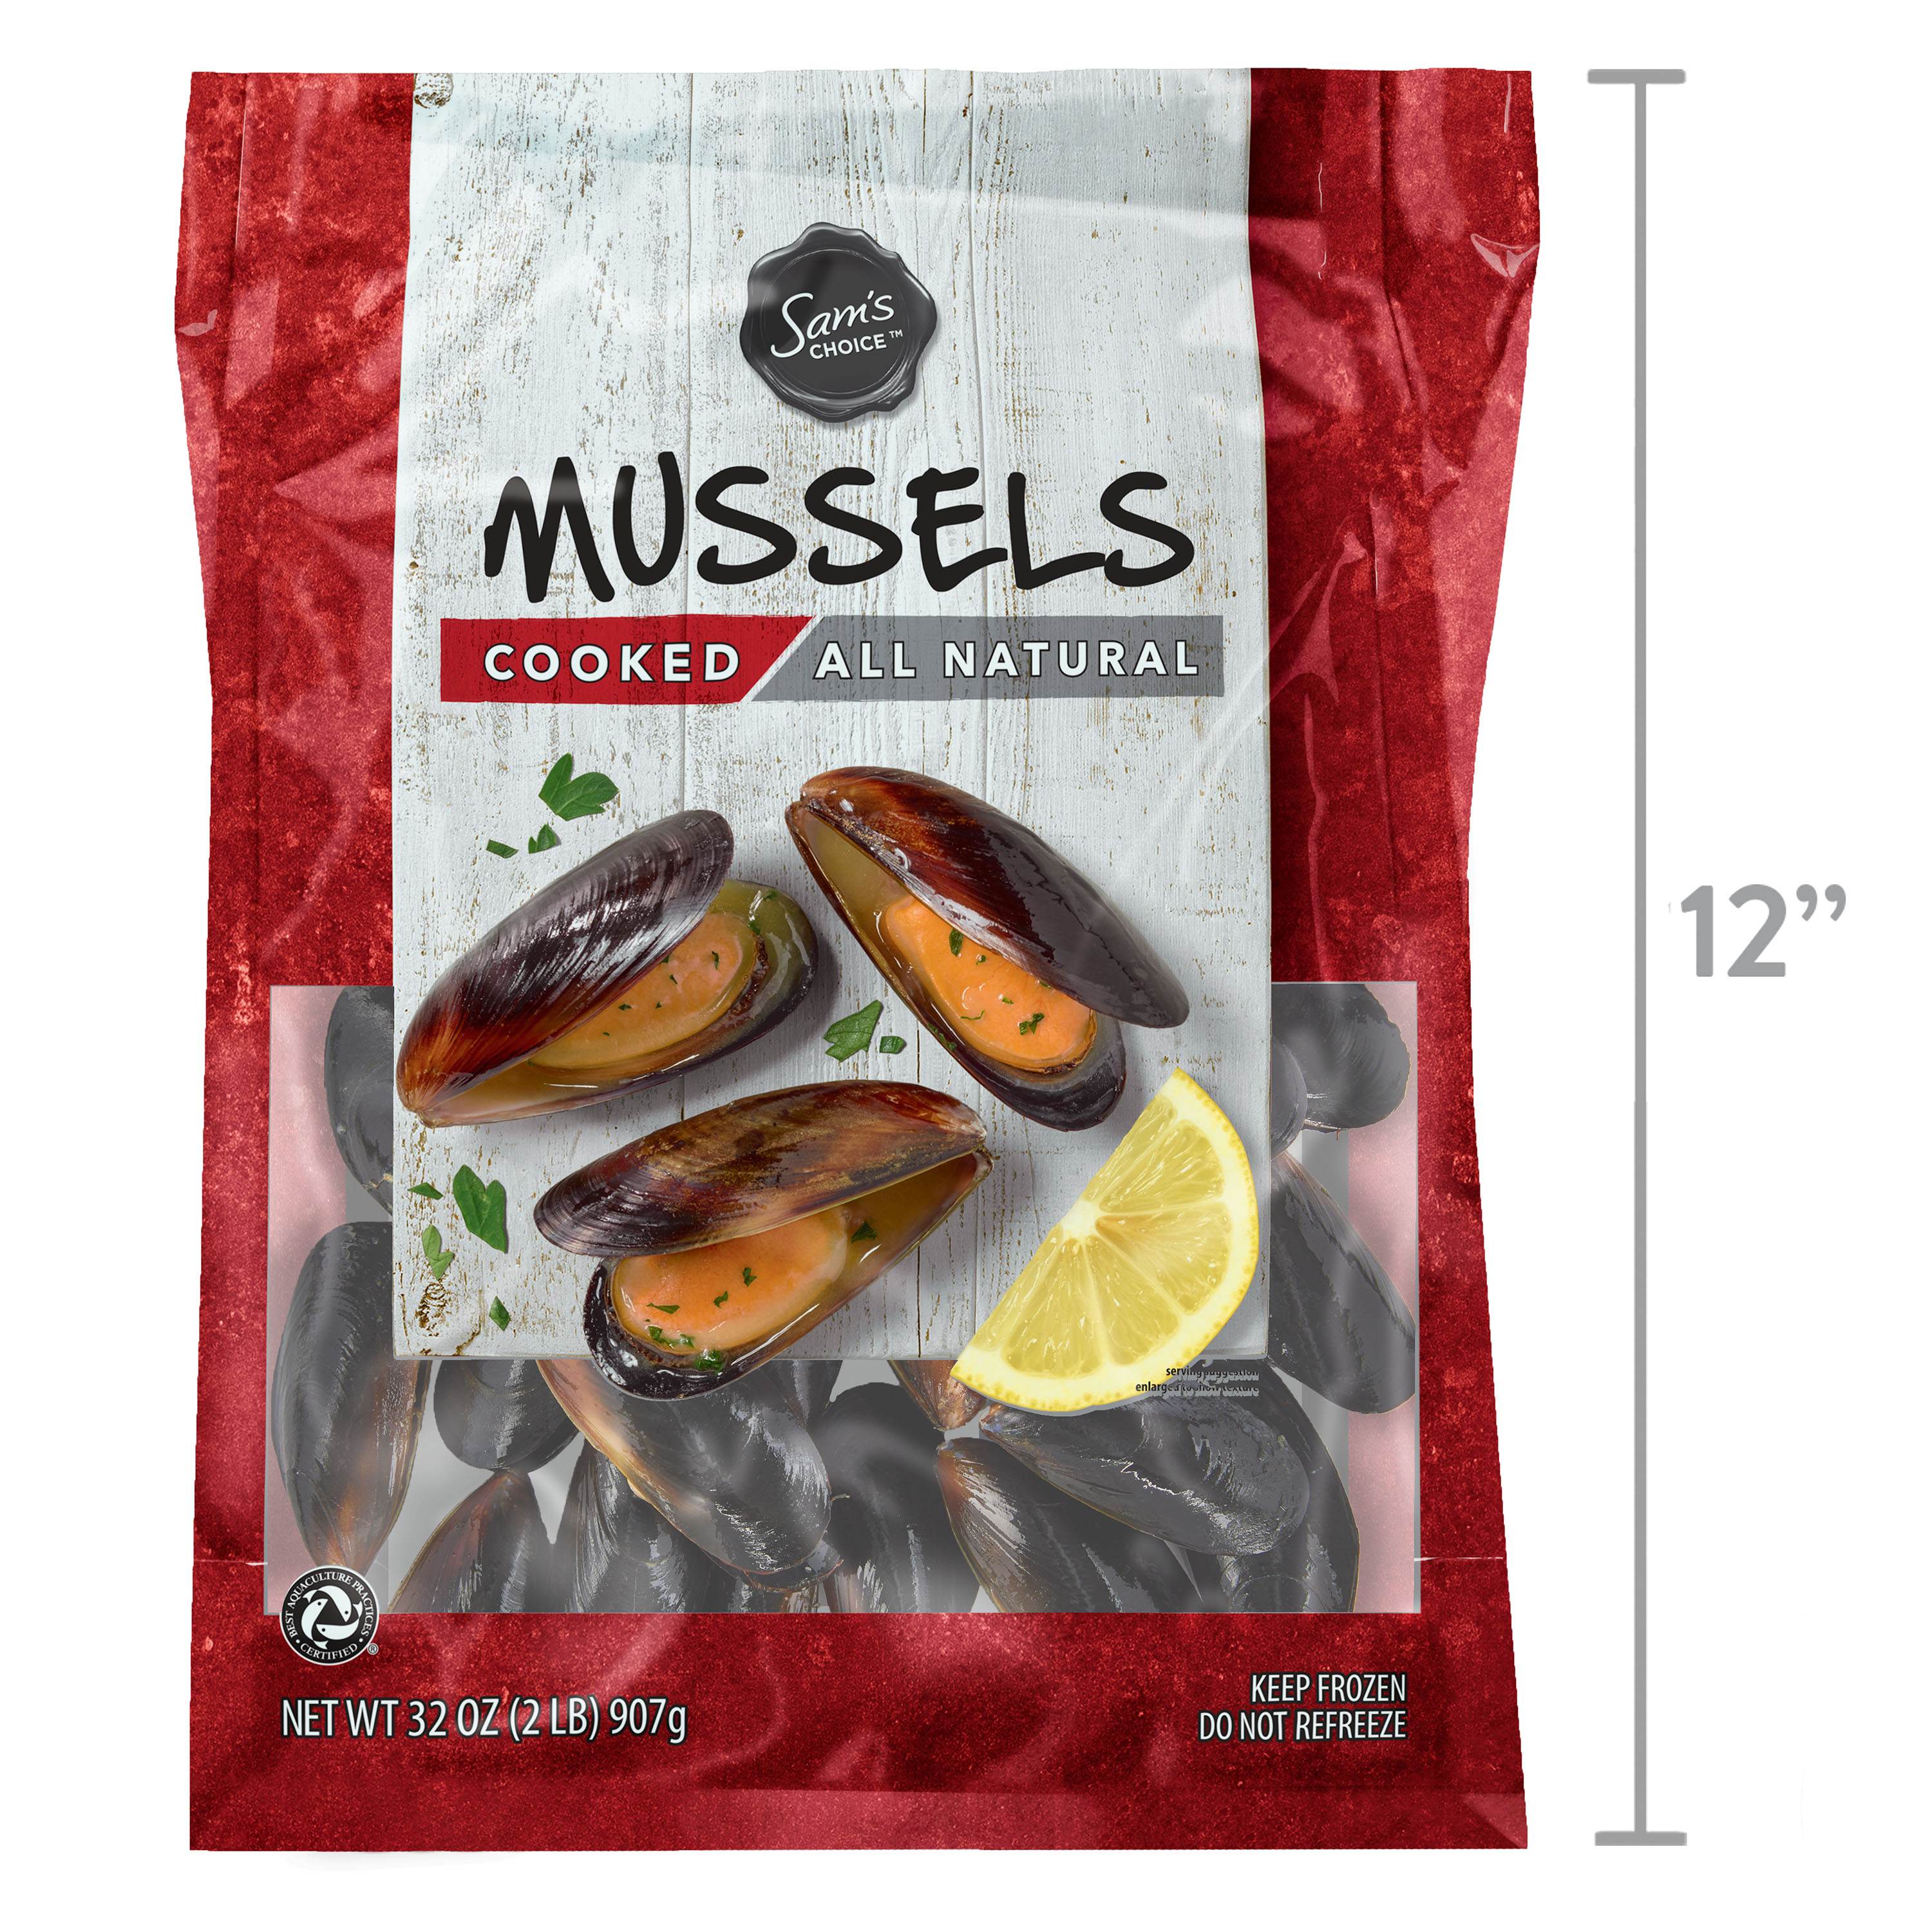 Sams Choice Frozen Mussels 2lb - image 8 of 9